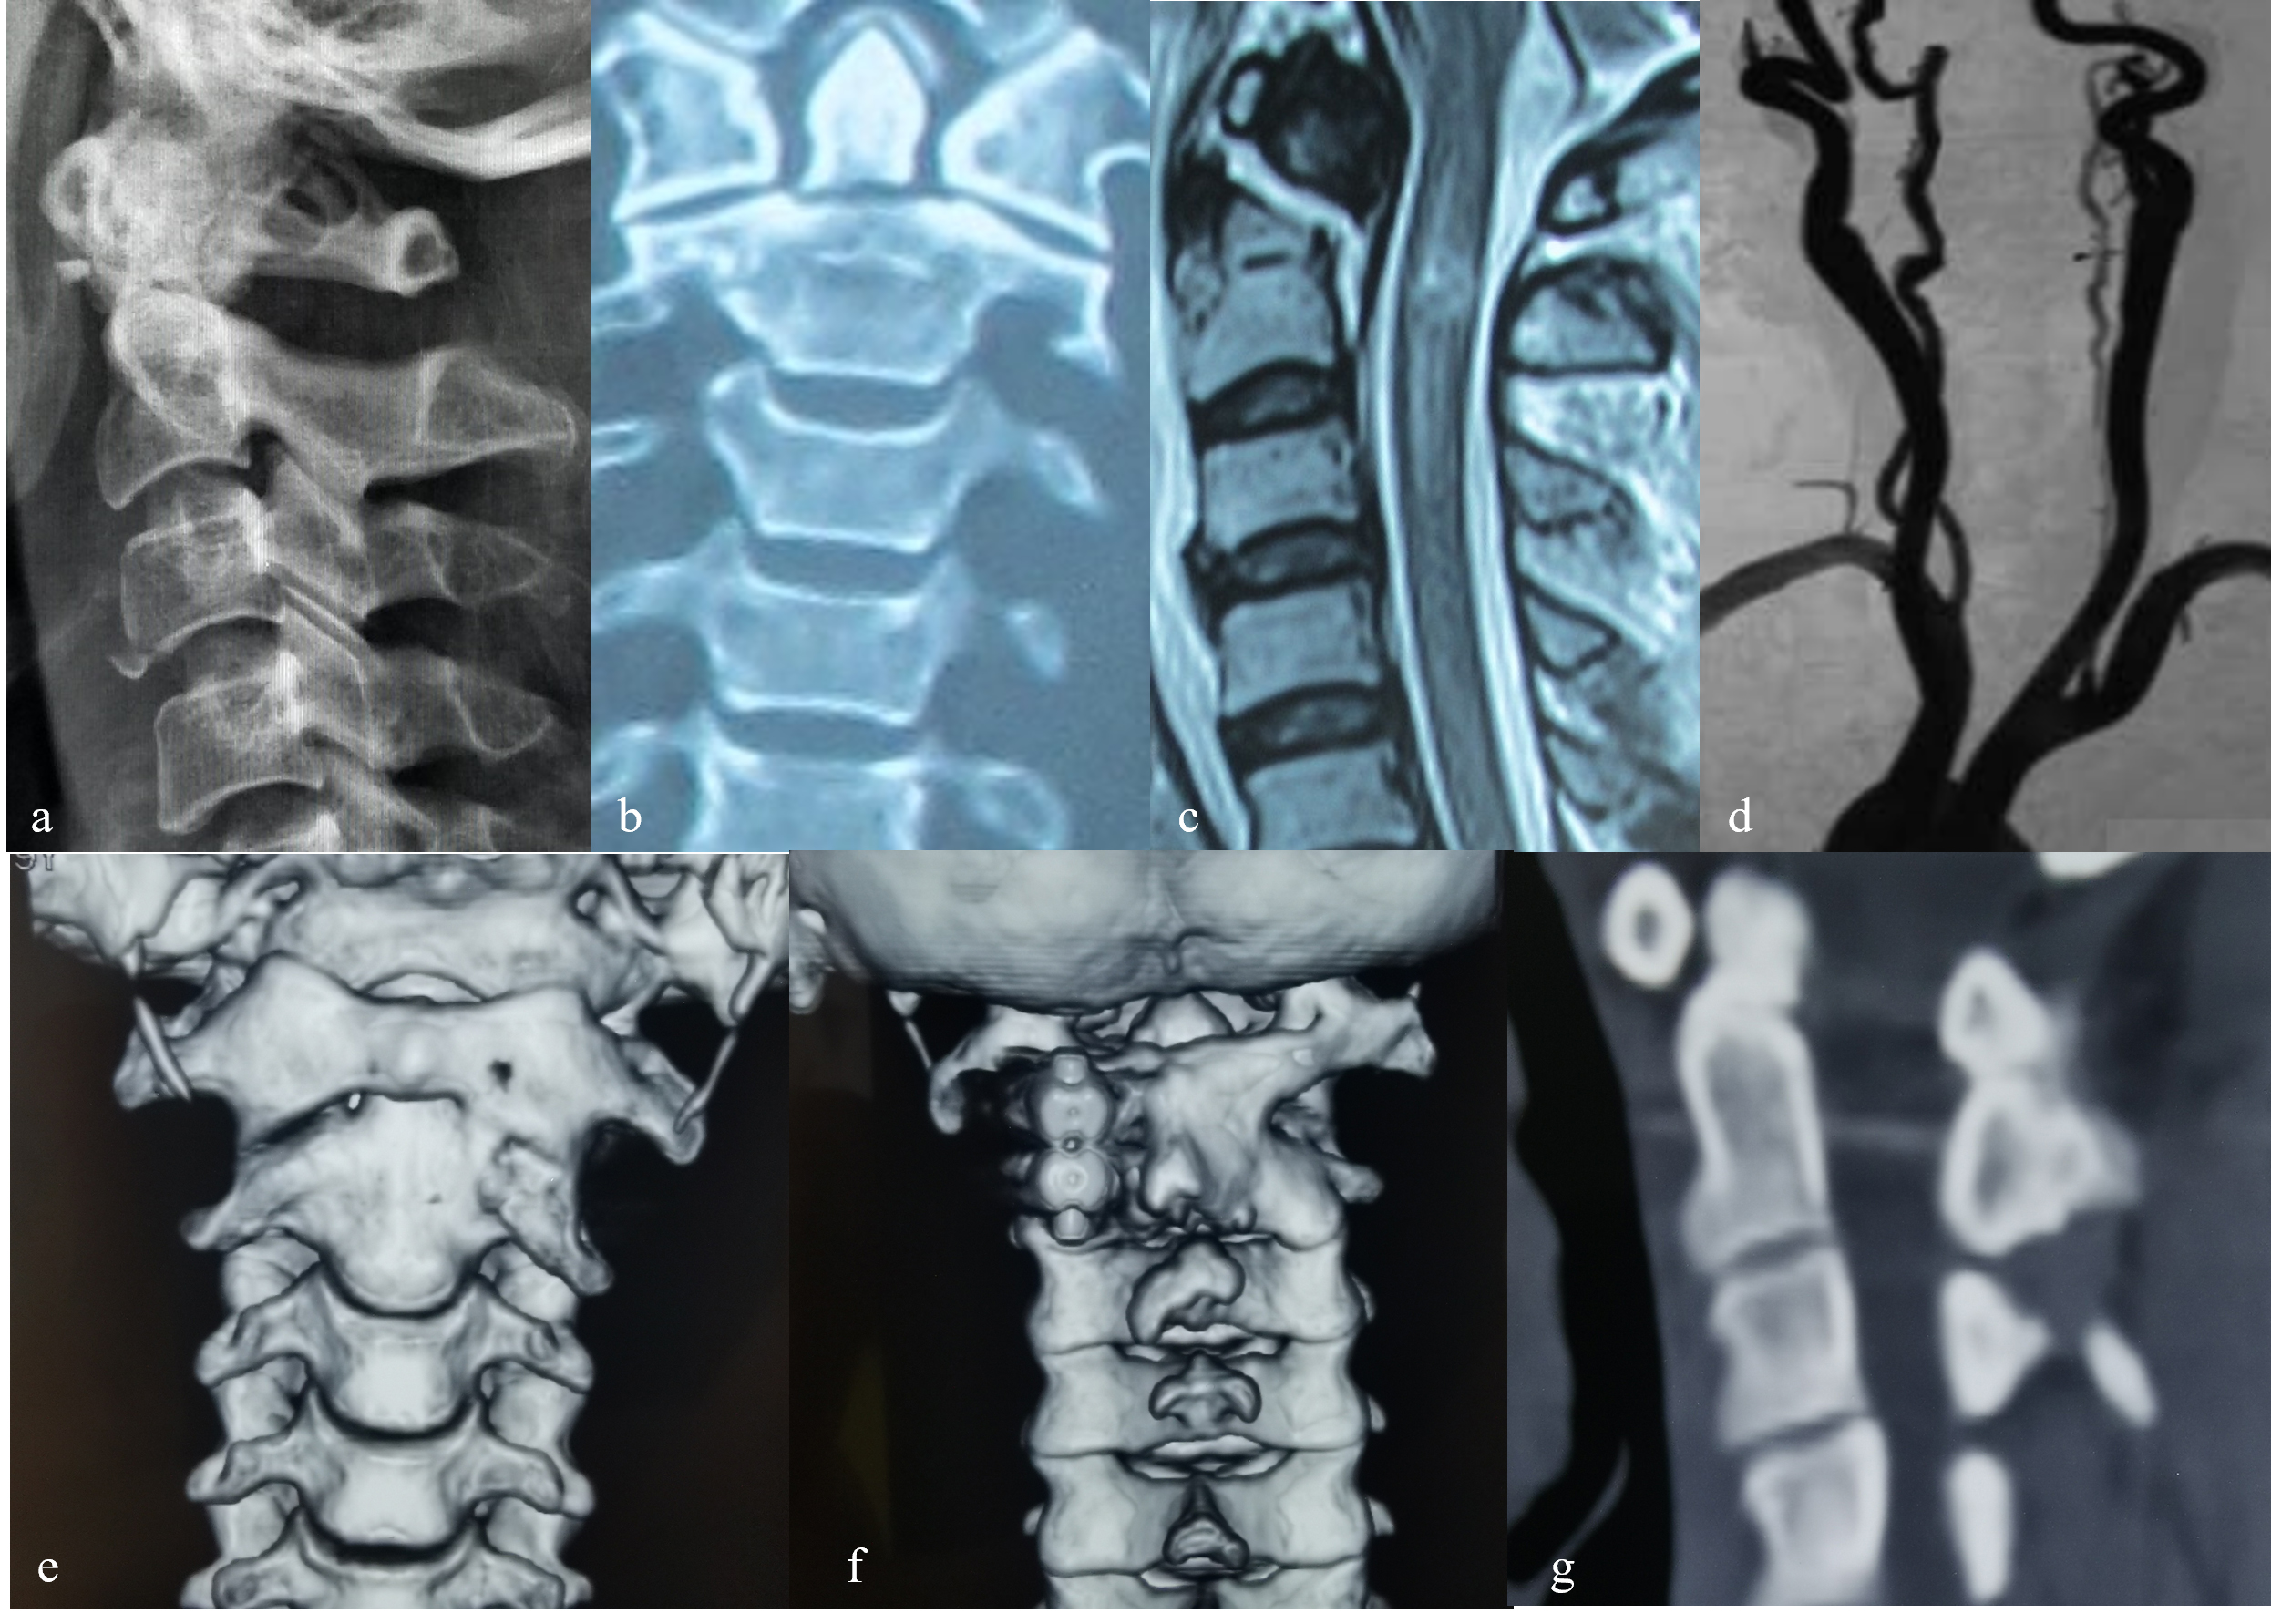 Female, 47 years old, odontoid fracture caused by traffic injury leading to cervical spinal cord injury and quadriplegia in the unilateral group. A, B: Preoperative lateral X-ray film and coronal CT showed Anderson type II odontoid fracture. C: Preoperative MRI T2WI showed odontoid fracture and diffuse intramedullary hyperintensity at C2 level. D: Preoperative CTA showed obvious stenosis of the vertebral artery on the right side. E: The anteroposterior X-ray film on the 2nd day after surgery showed the C1–2 pedicle screws and rods on the right side were in good position. F: The sagittal CT at 6 months after surgery showed the bone graft between the C1 posterior arch and C2 spinous process was clear and fused. G: The axial CT at 6 months after surgery showed the pedicle screw on the right side was in good position without loosening or rupture.